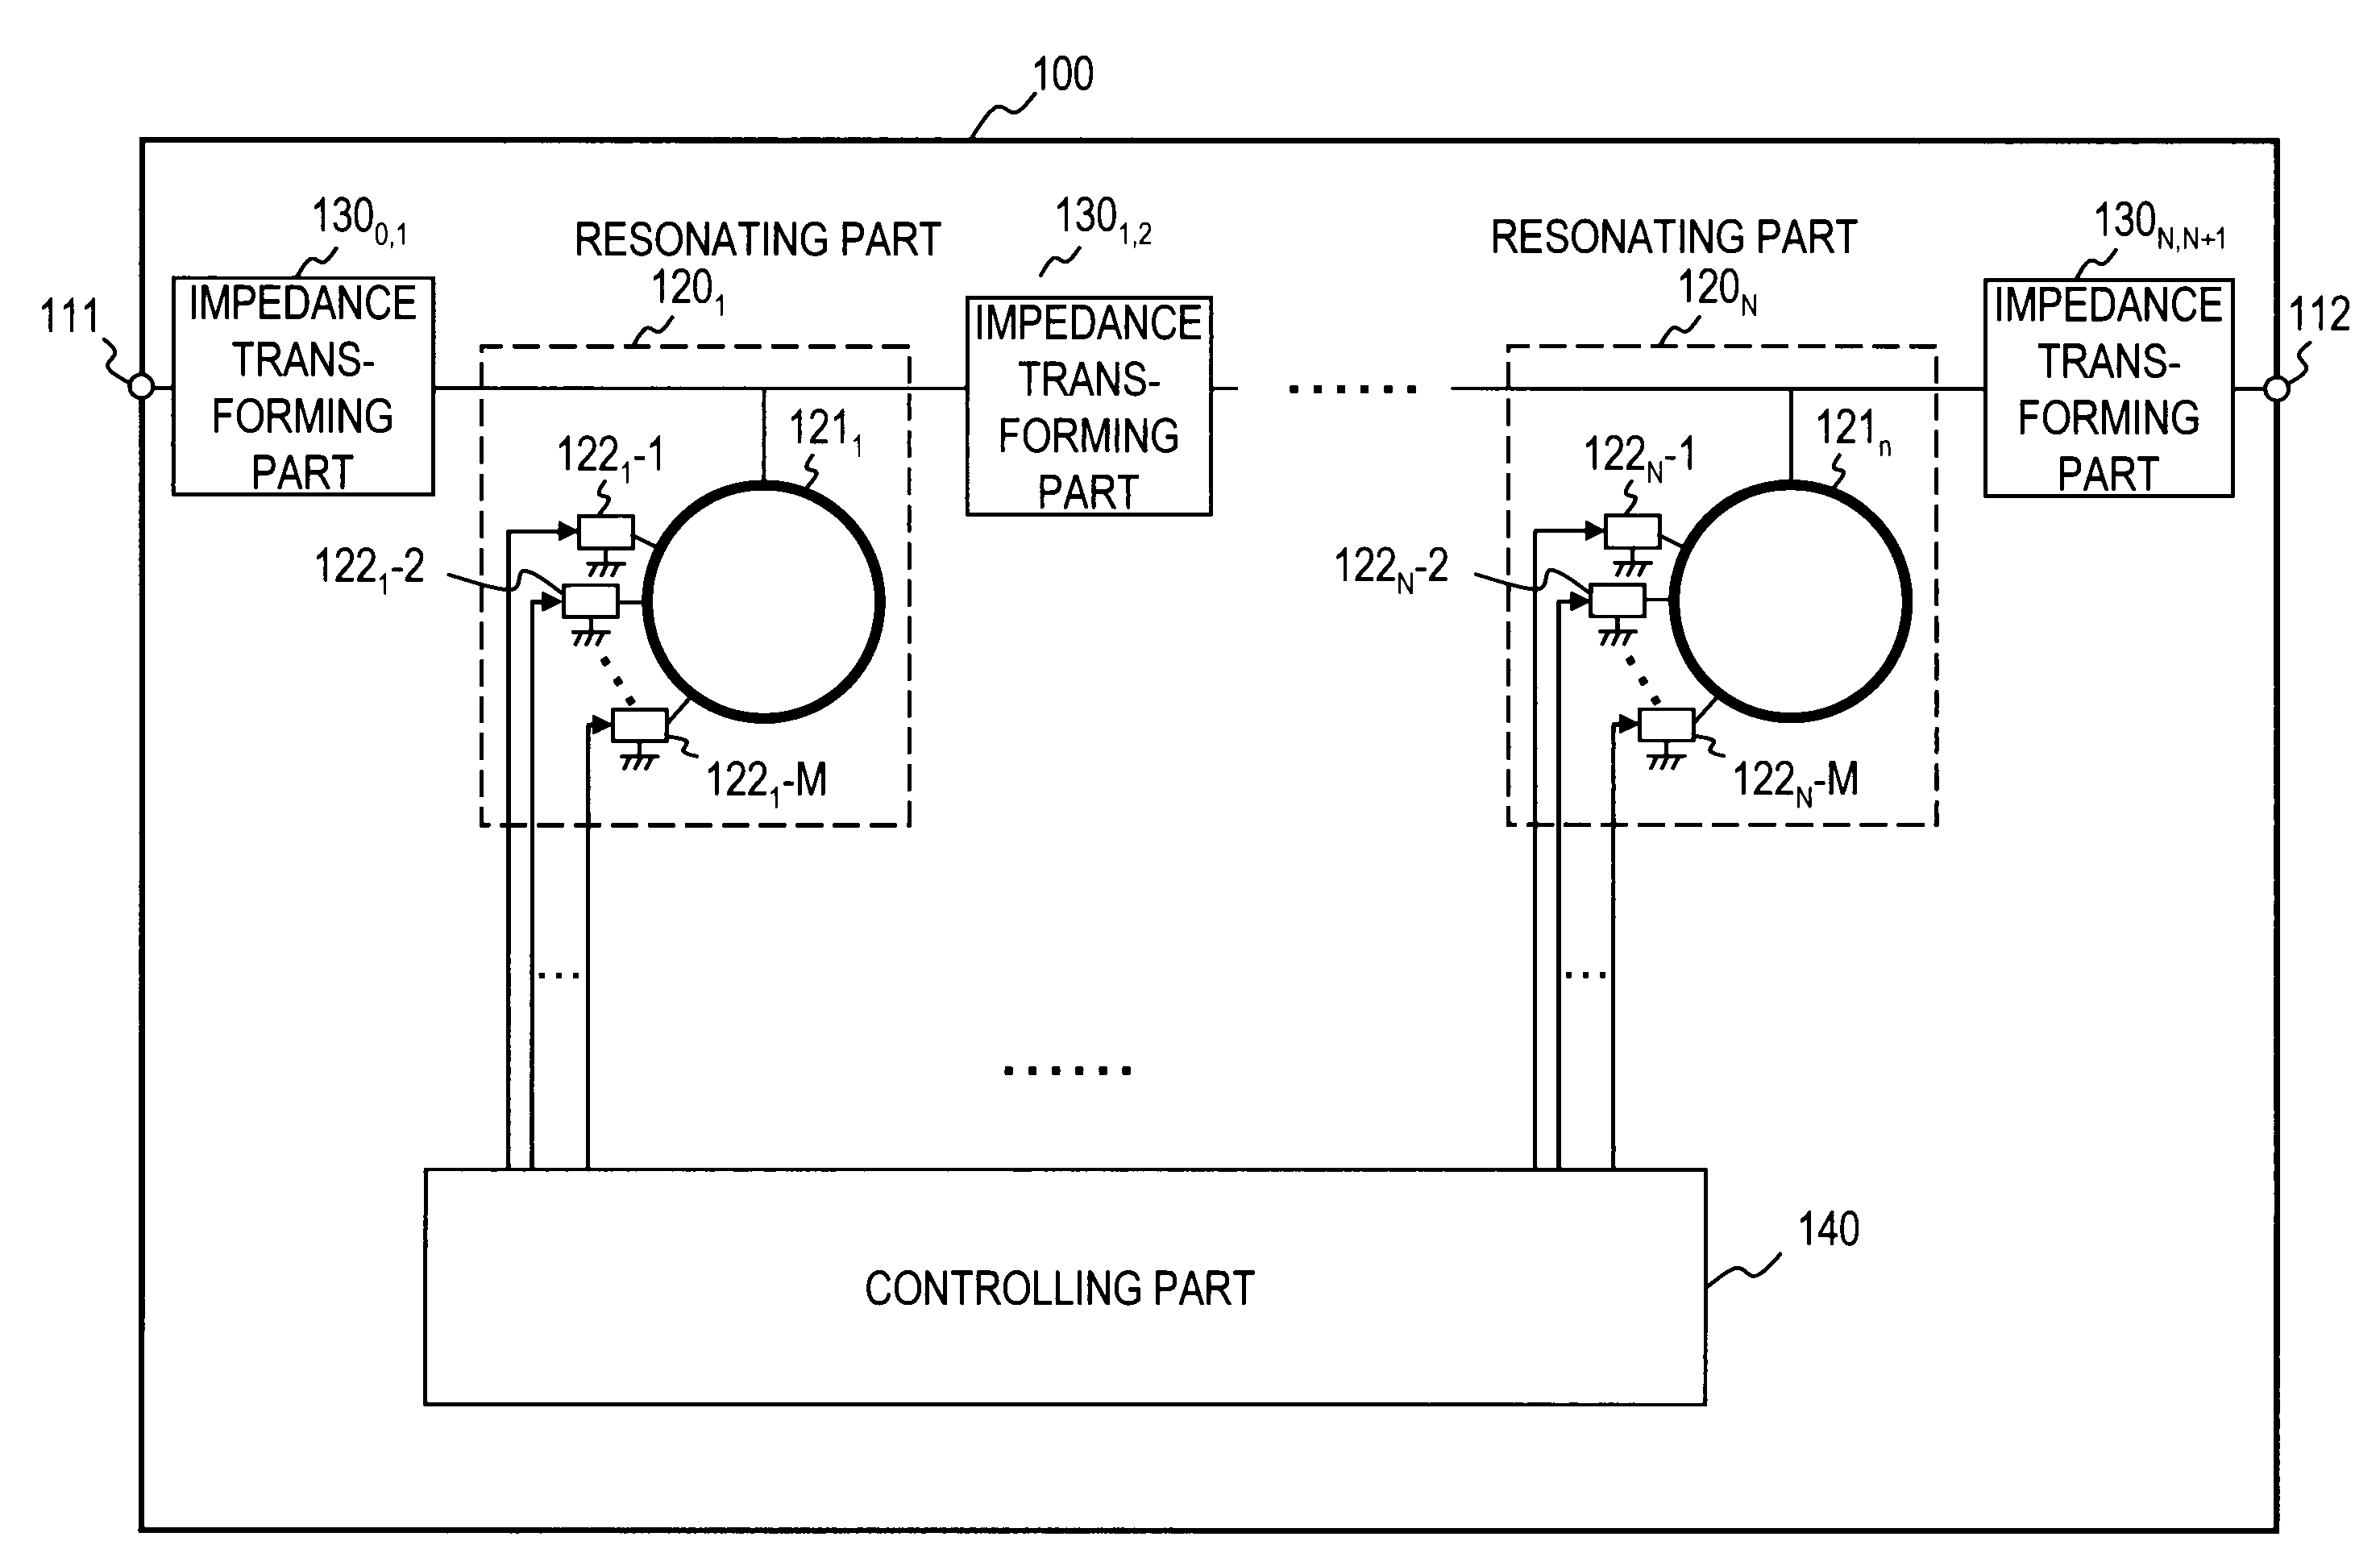 Signal selecting device